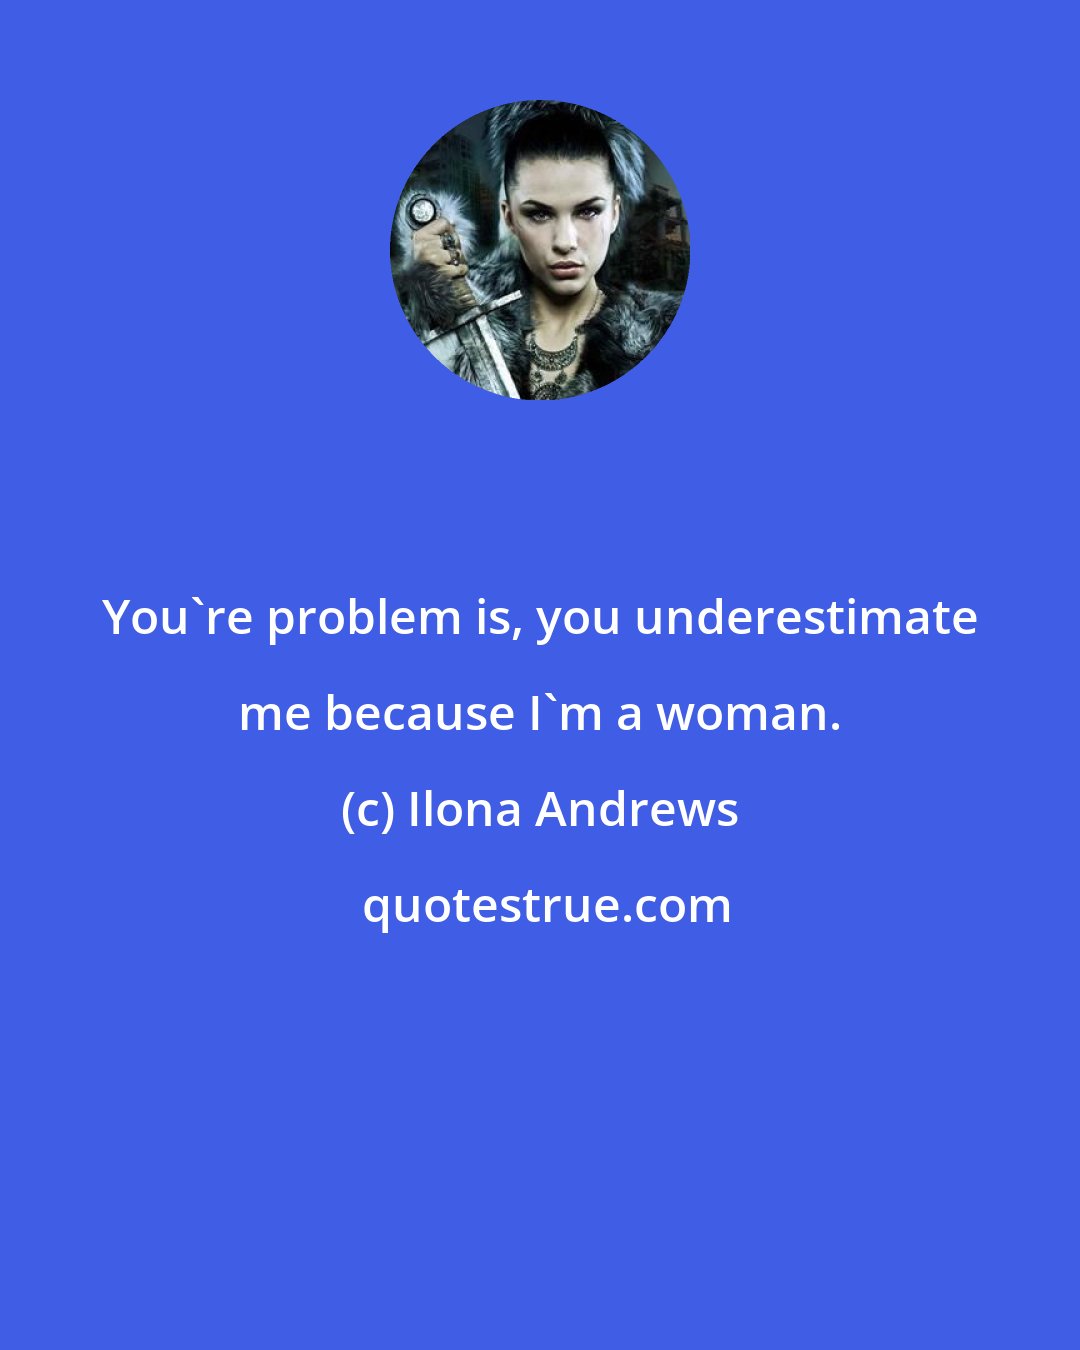 Ilona Andrews: You're problem is, you underestimate me because I'm a woman.